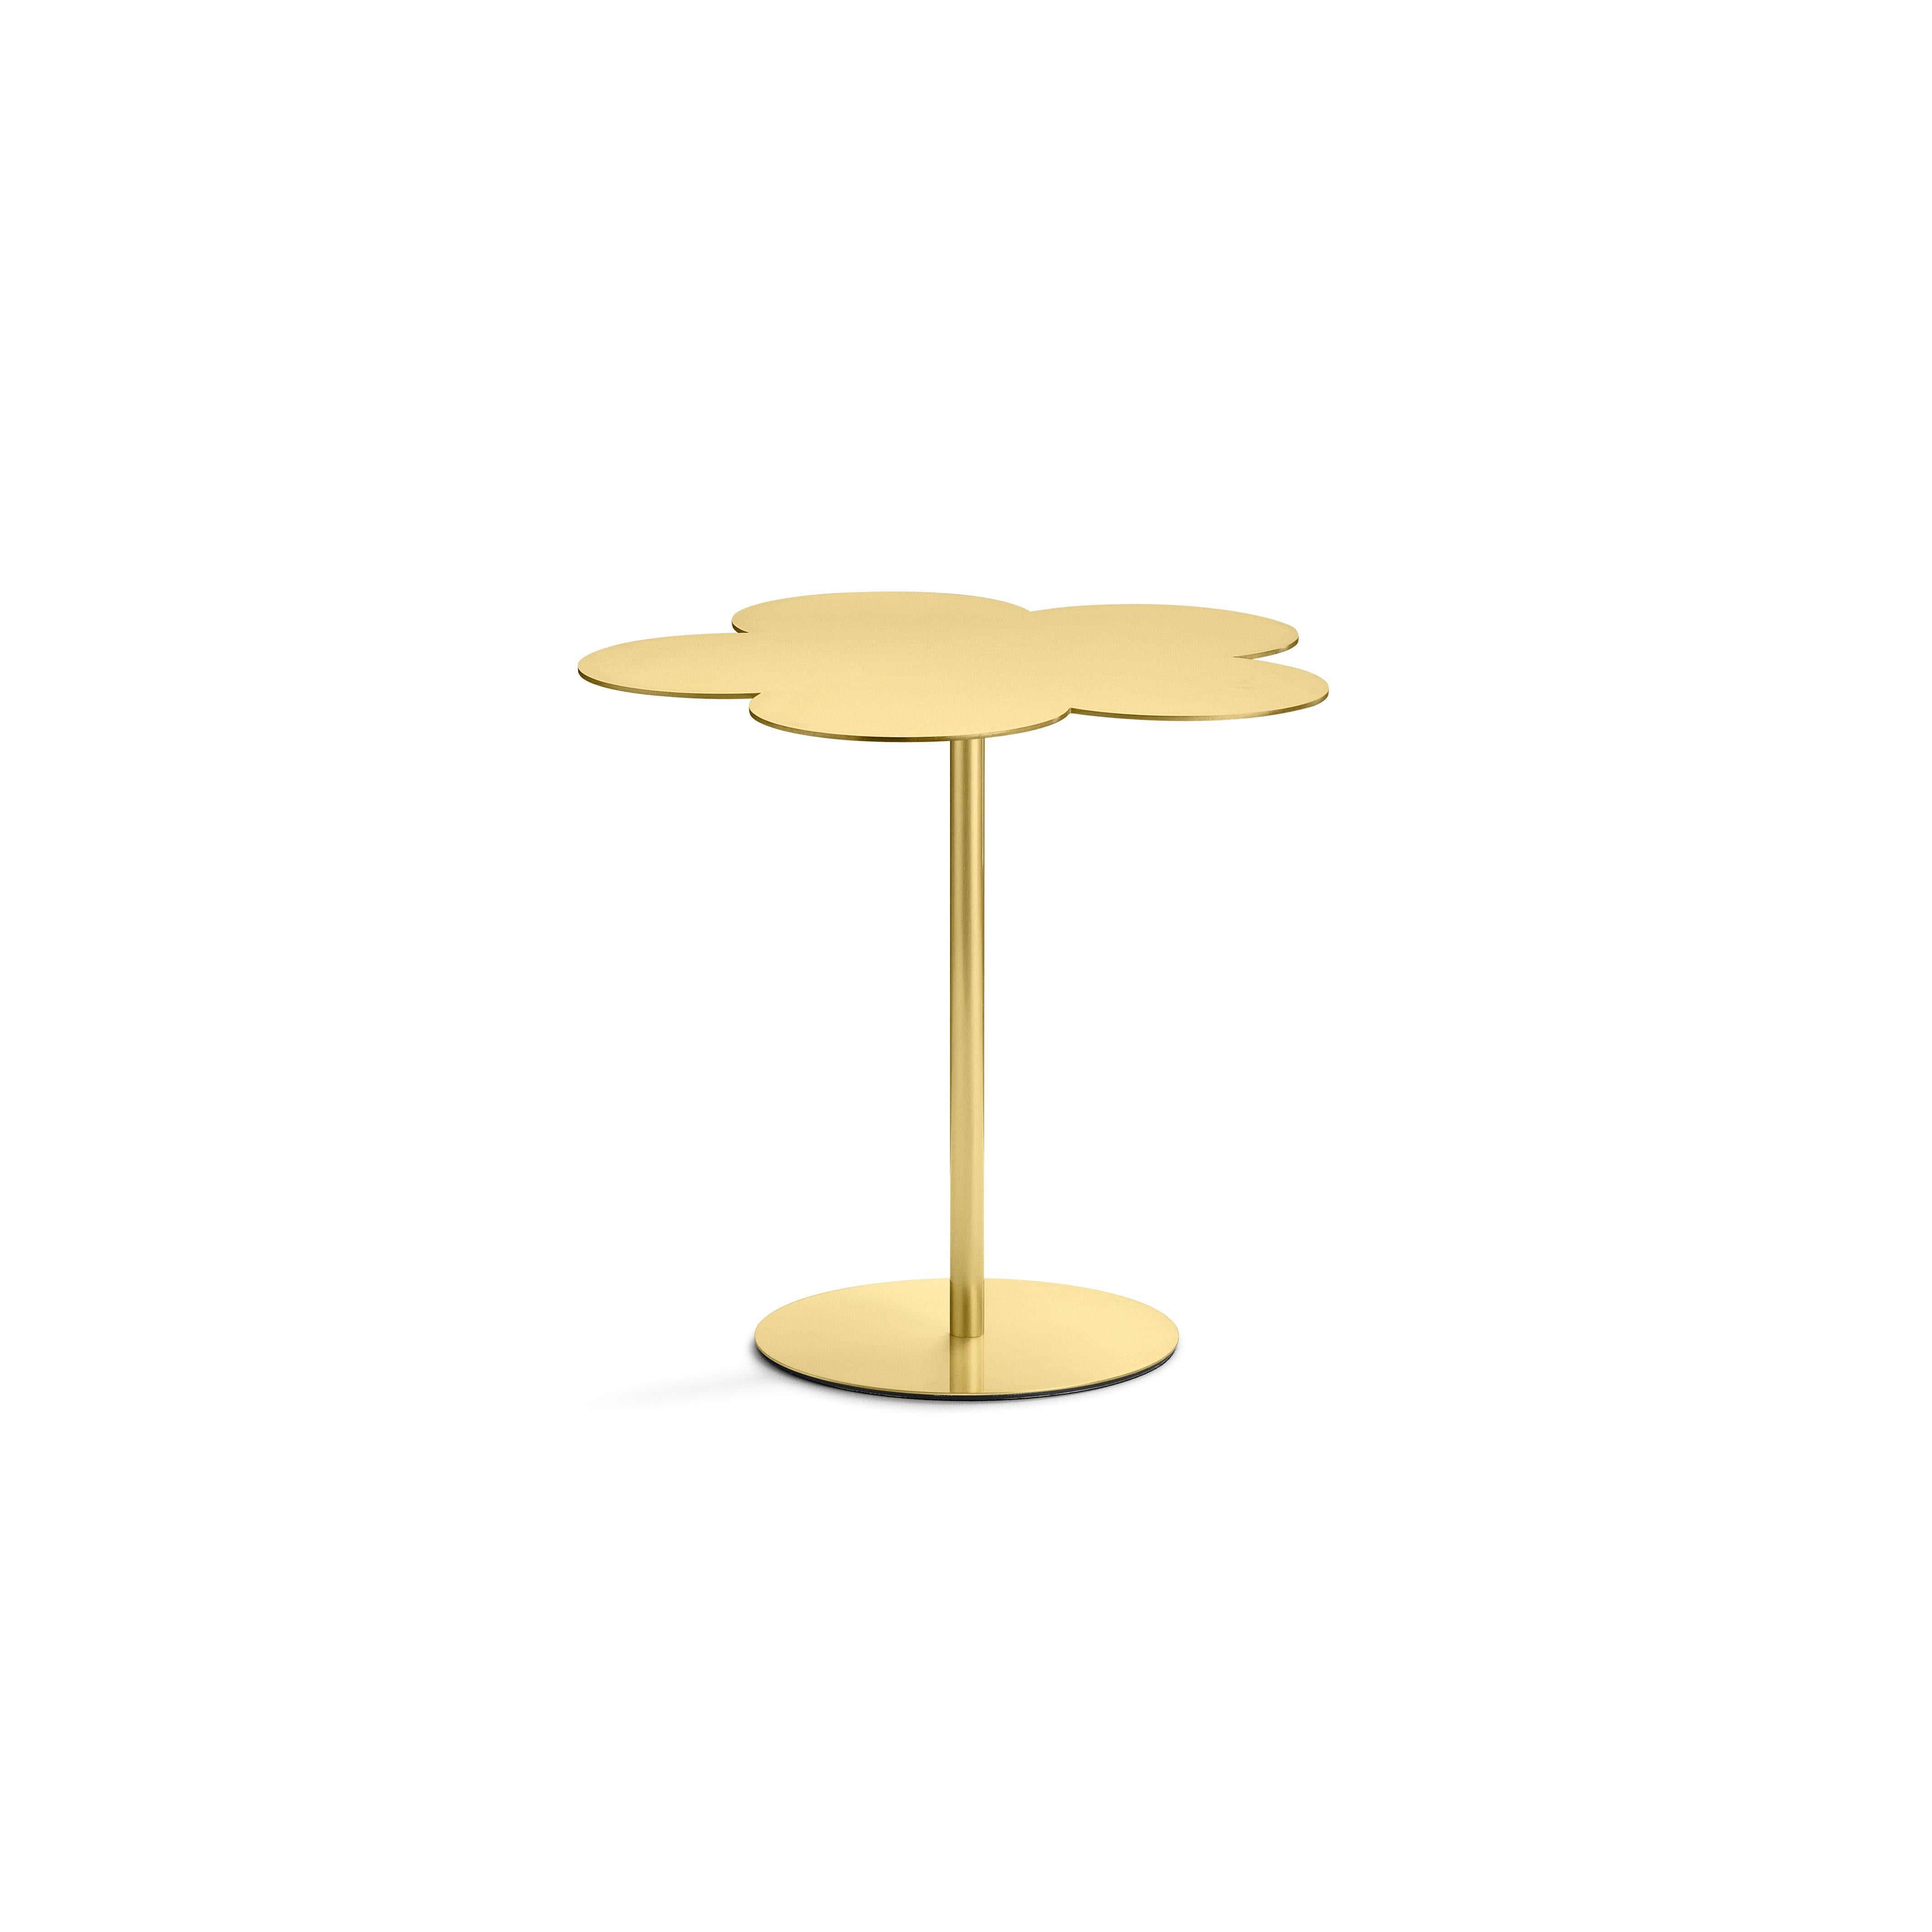 Large coffee side table
The natural element is the focus of this project of a coffee table where the surface is shaped like a stylized flower. A triptych of distinct elements which rest on a circular foot and, given the different heights, can be